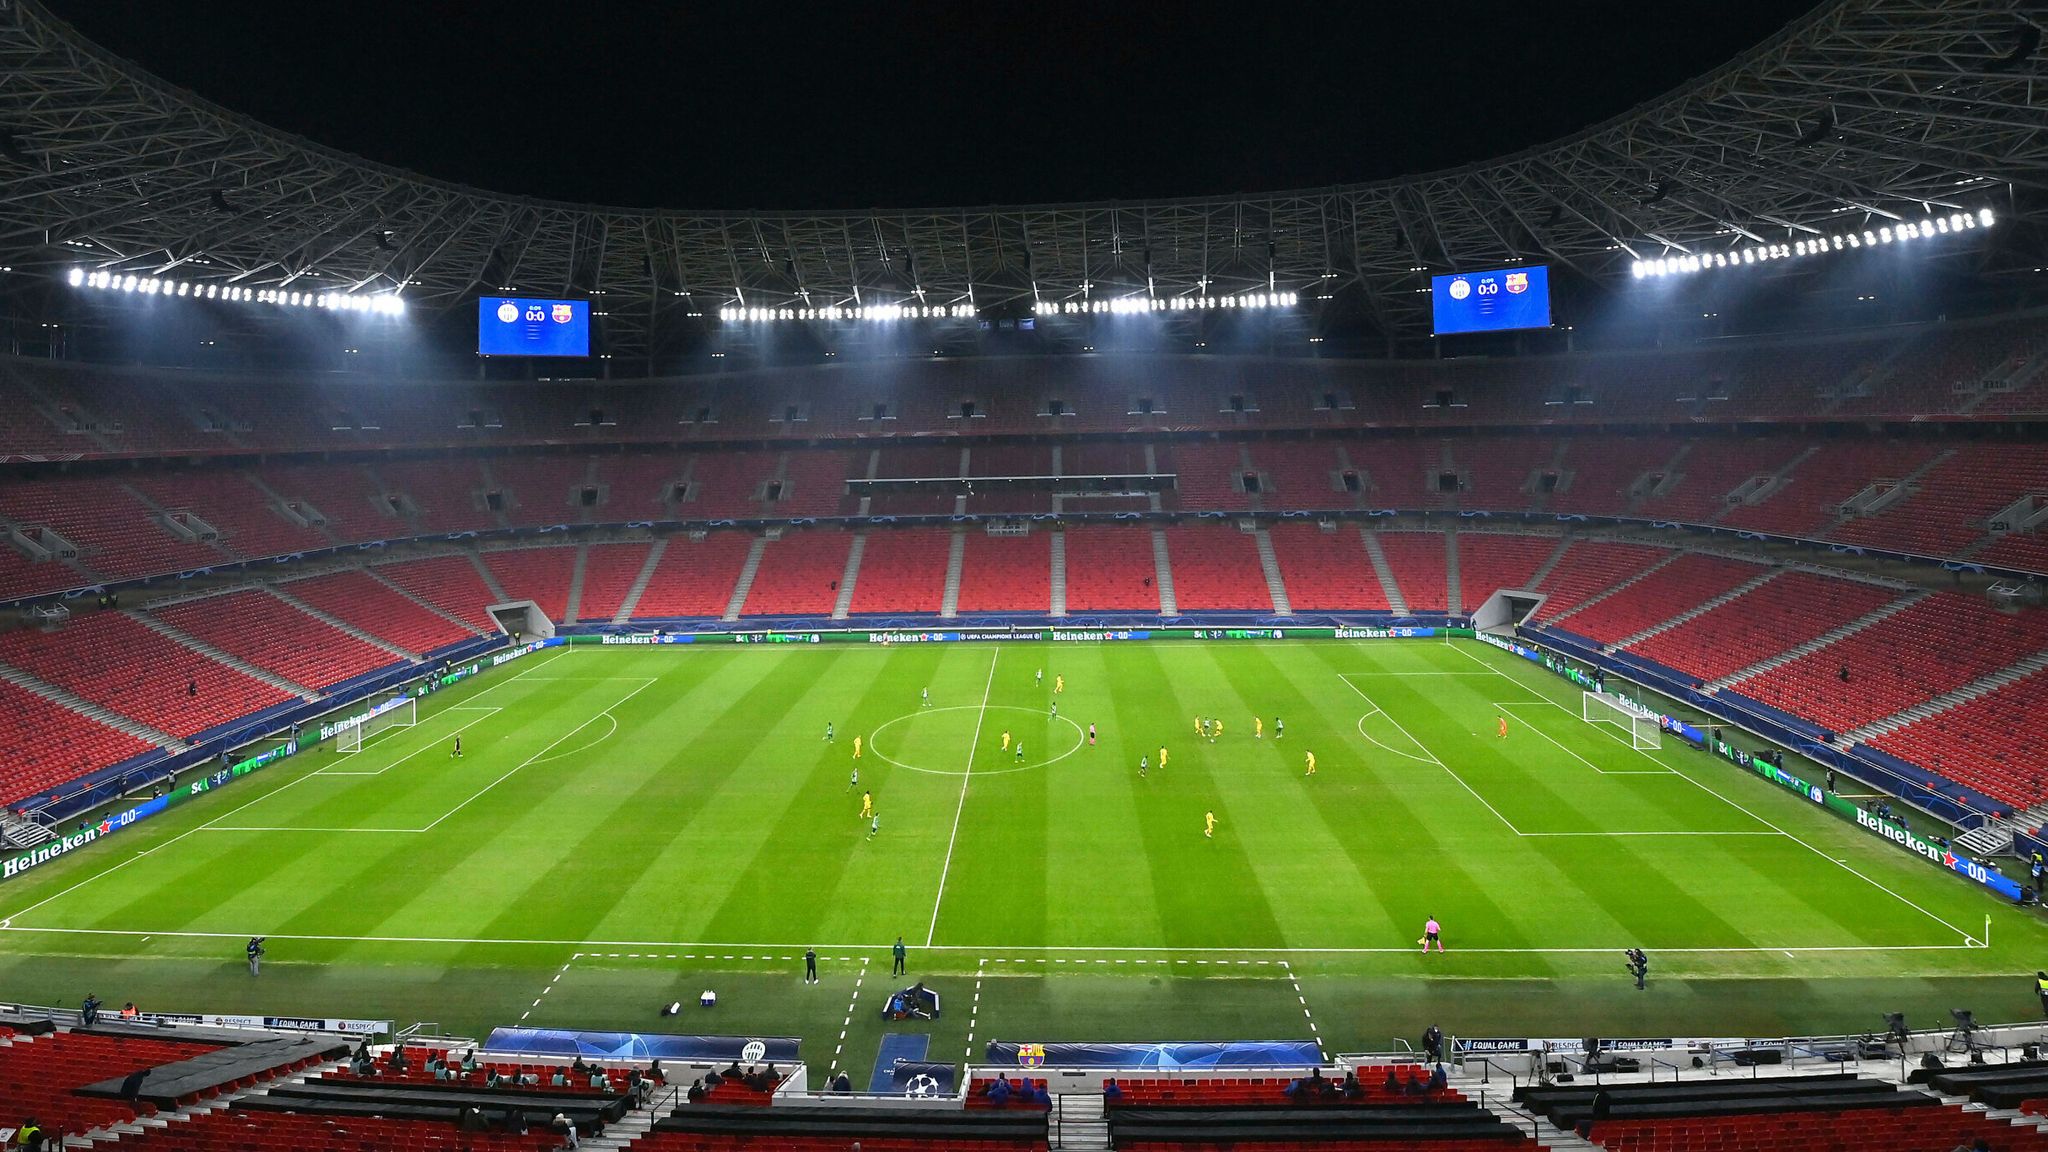 Liverpool S Champions League Trip To Rb Leipzig Moved To Puskas Arena In Budapest Football News Sky Sports